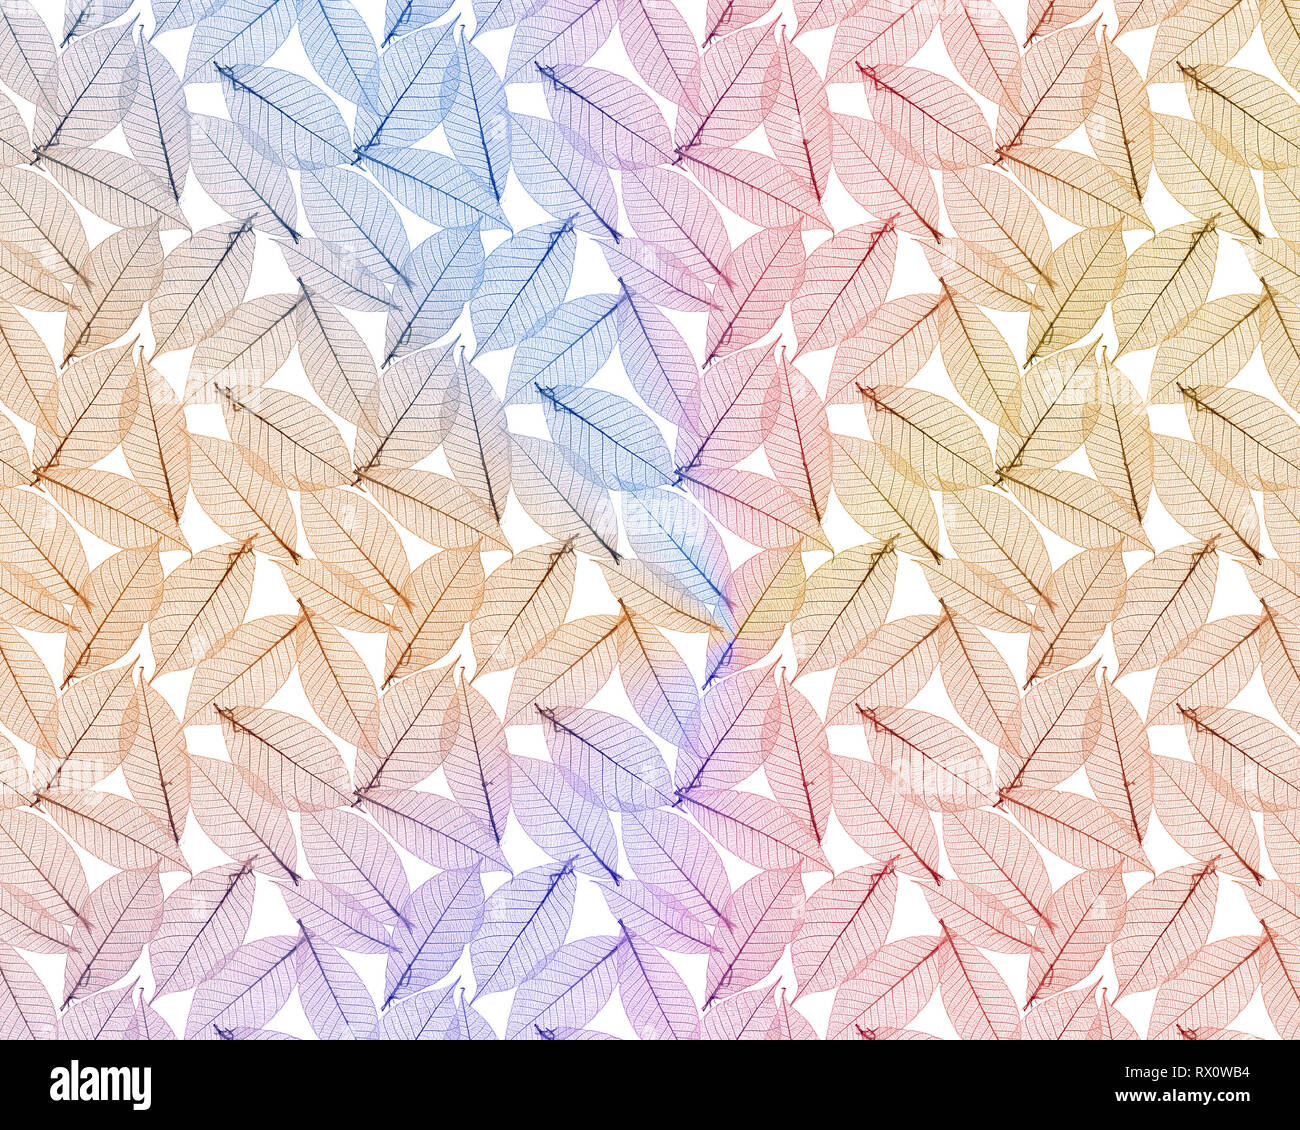 Abstract background of delicate and detailed leaves in soft pastel colors Stock Photo